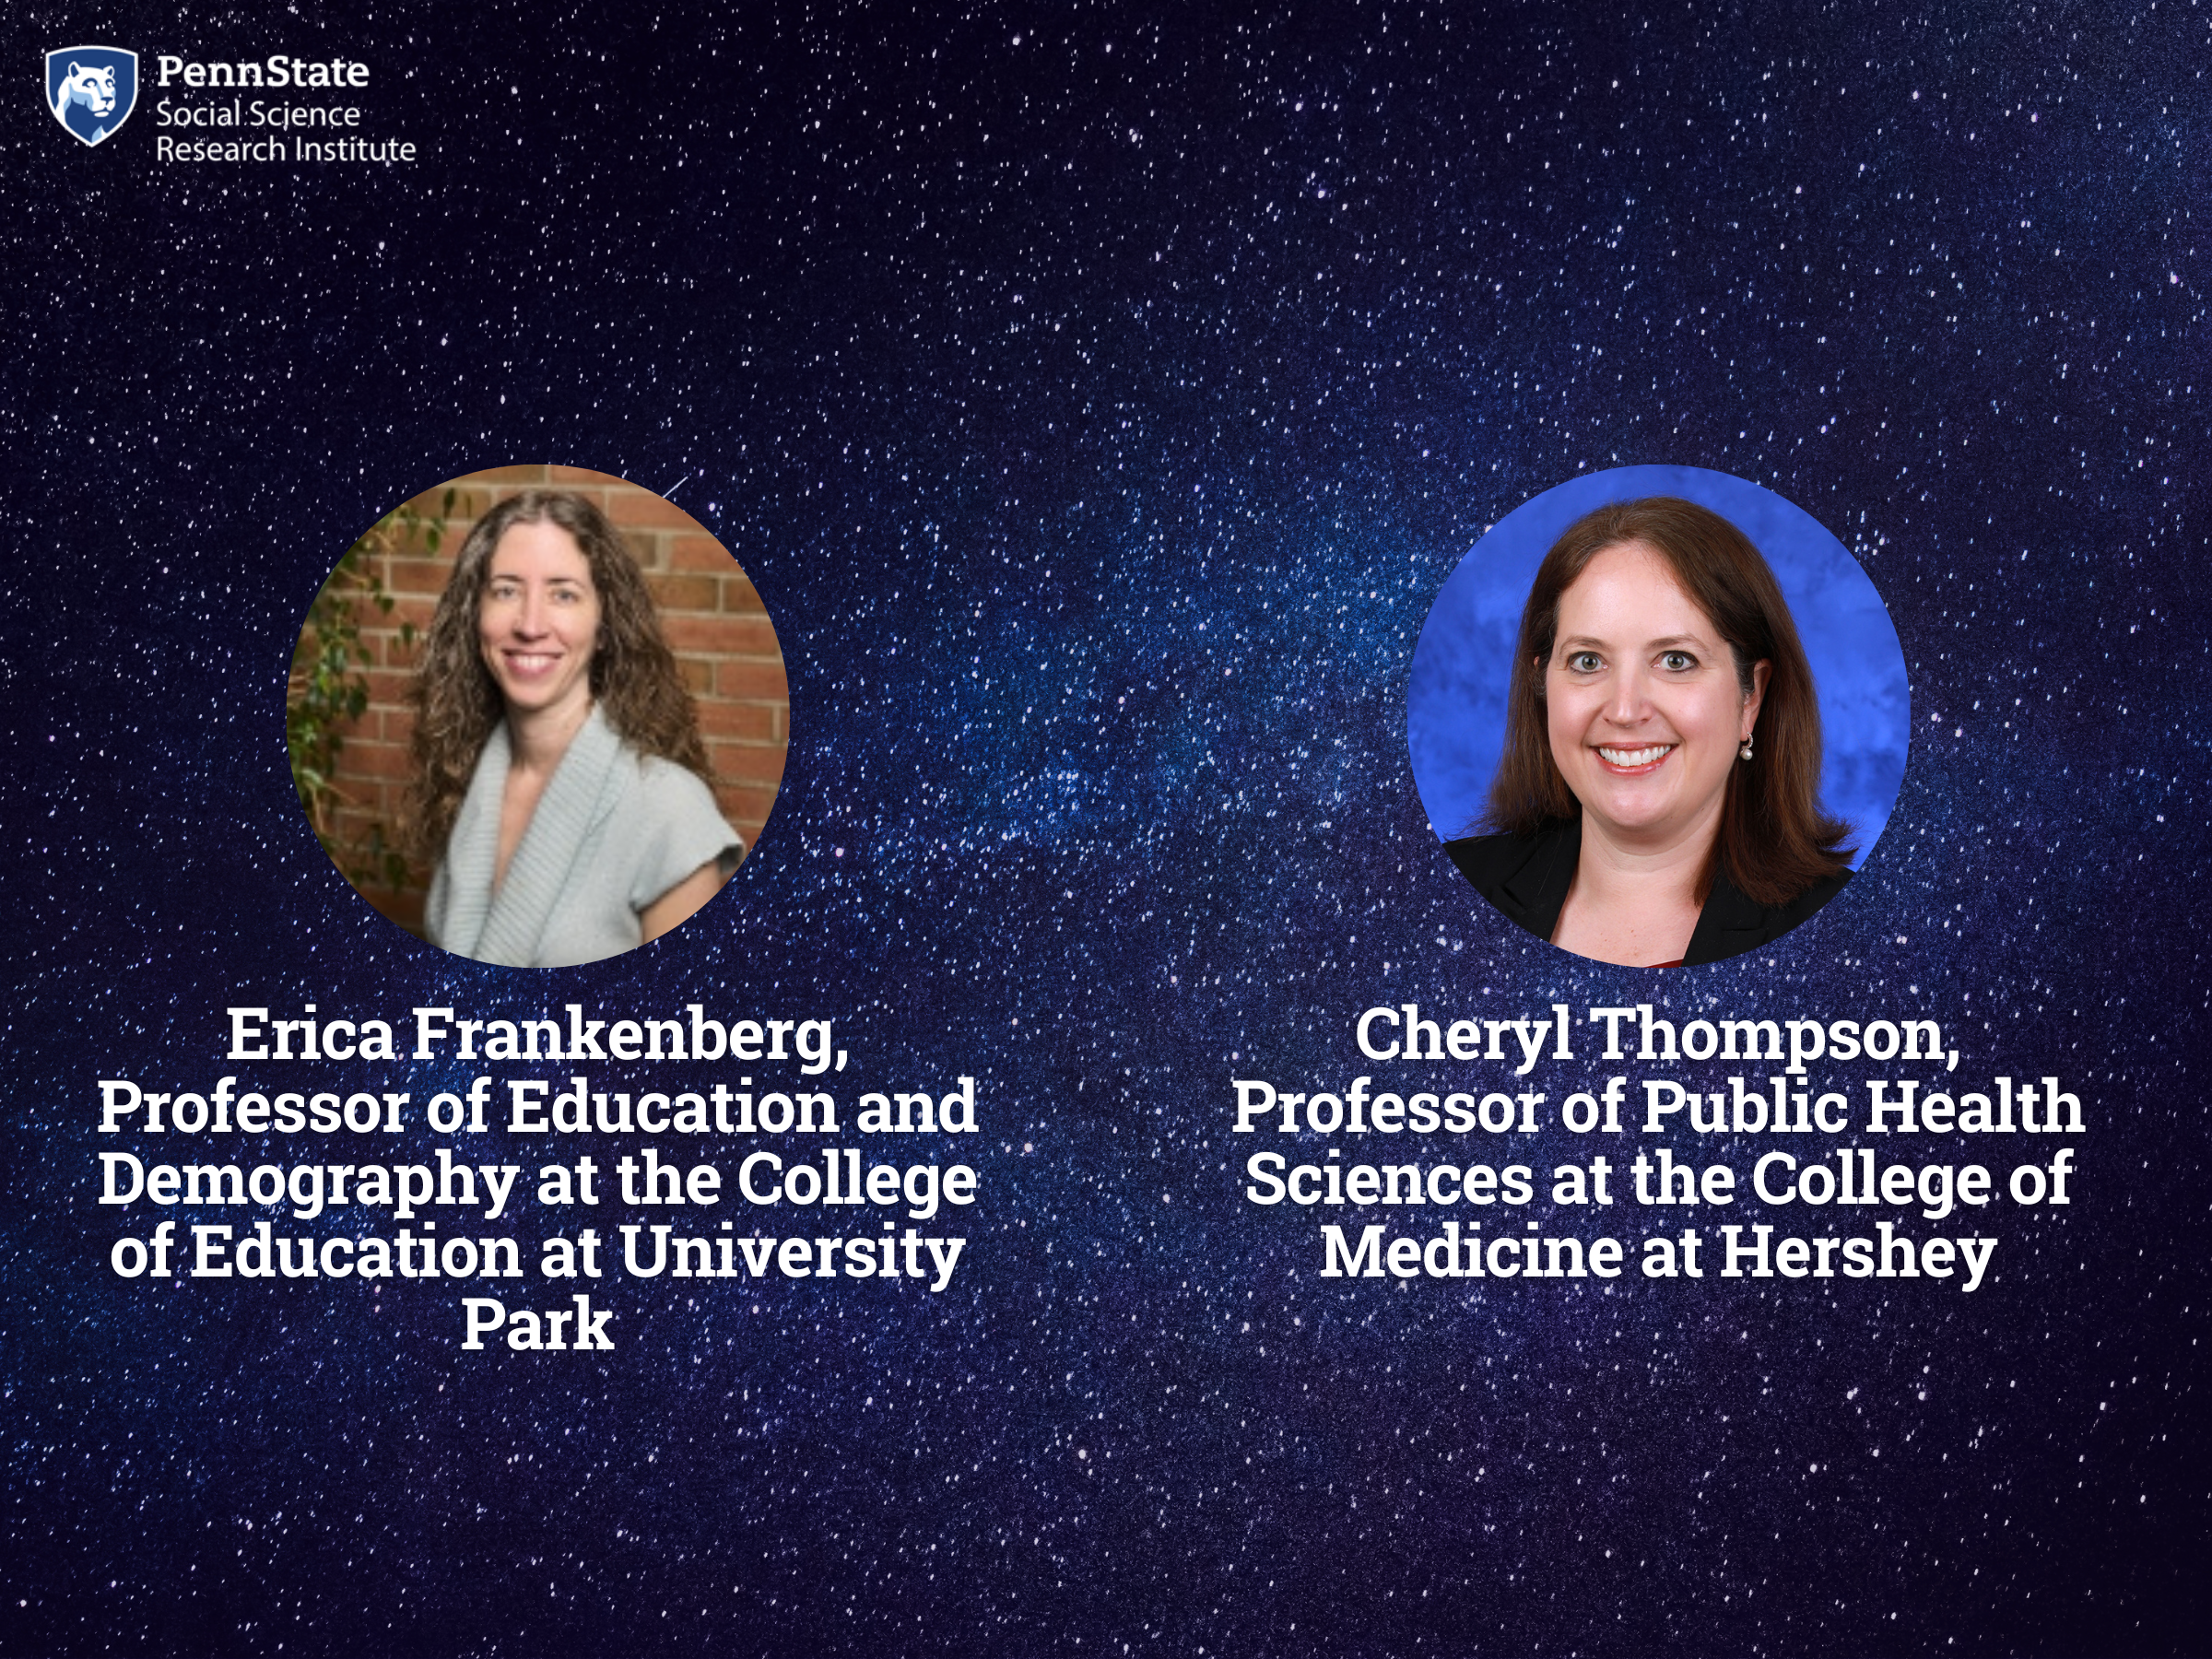 Headshots of Erica Frankenberg and Cheryl Thompson over a dark blue background with white galaxy stars.